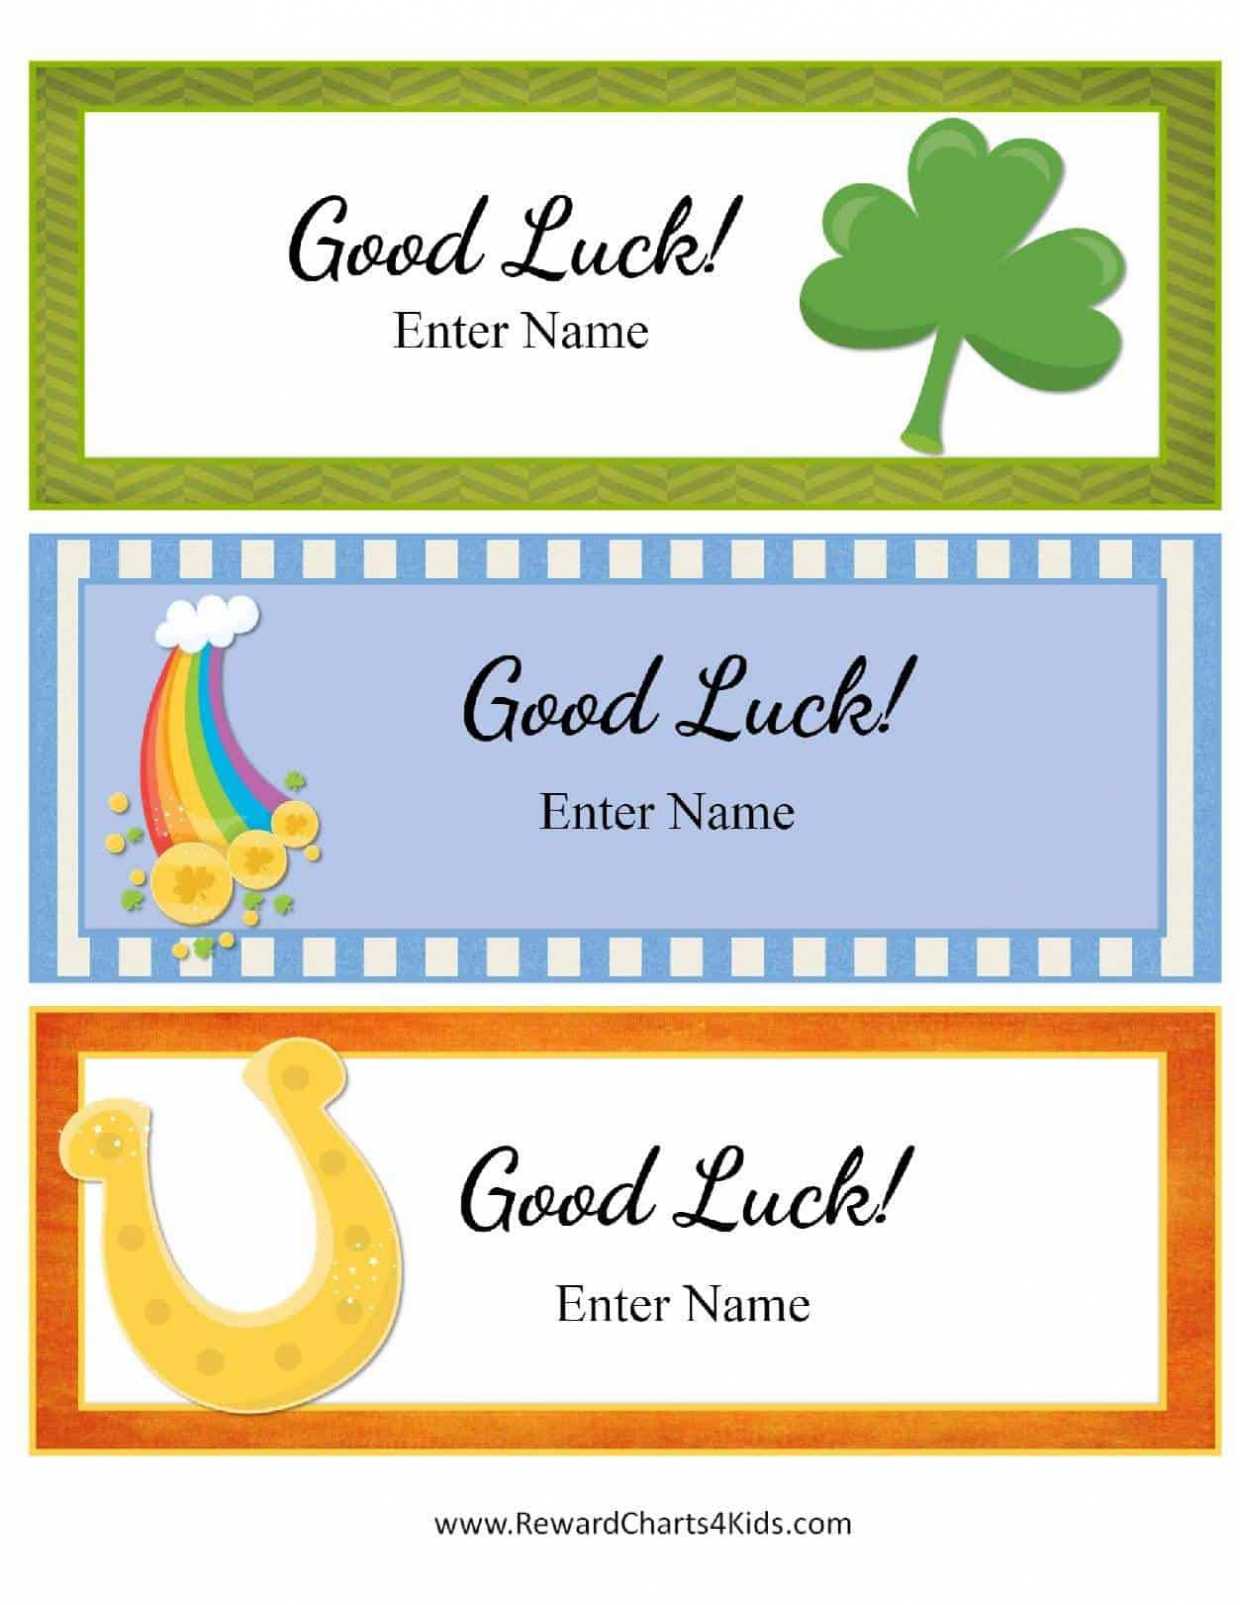 Free Good Luck Cards For Kids | Customize Online &amp; Print At Home in Good Luck Card Templates